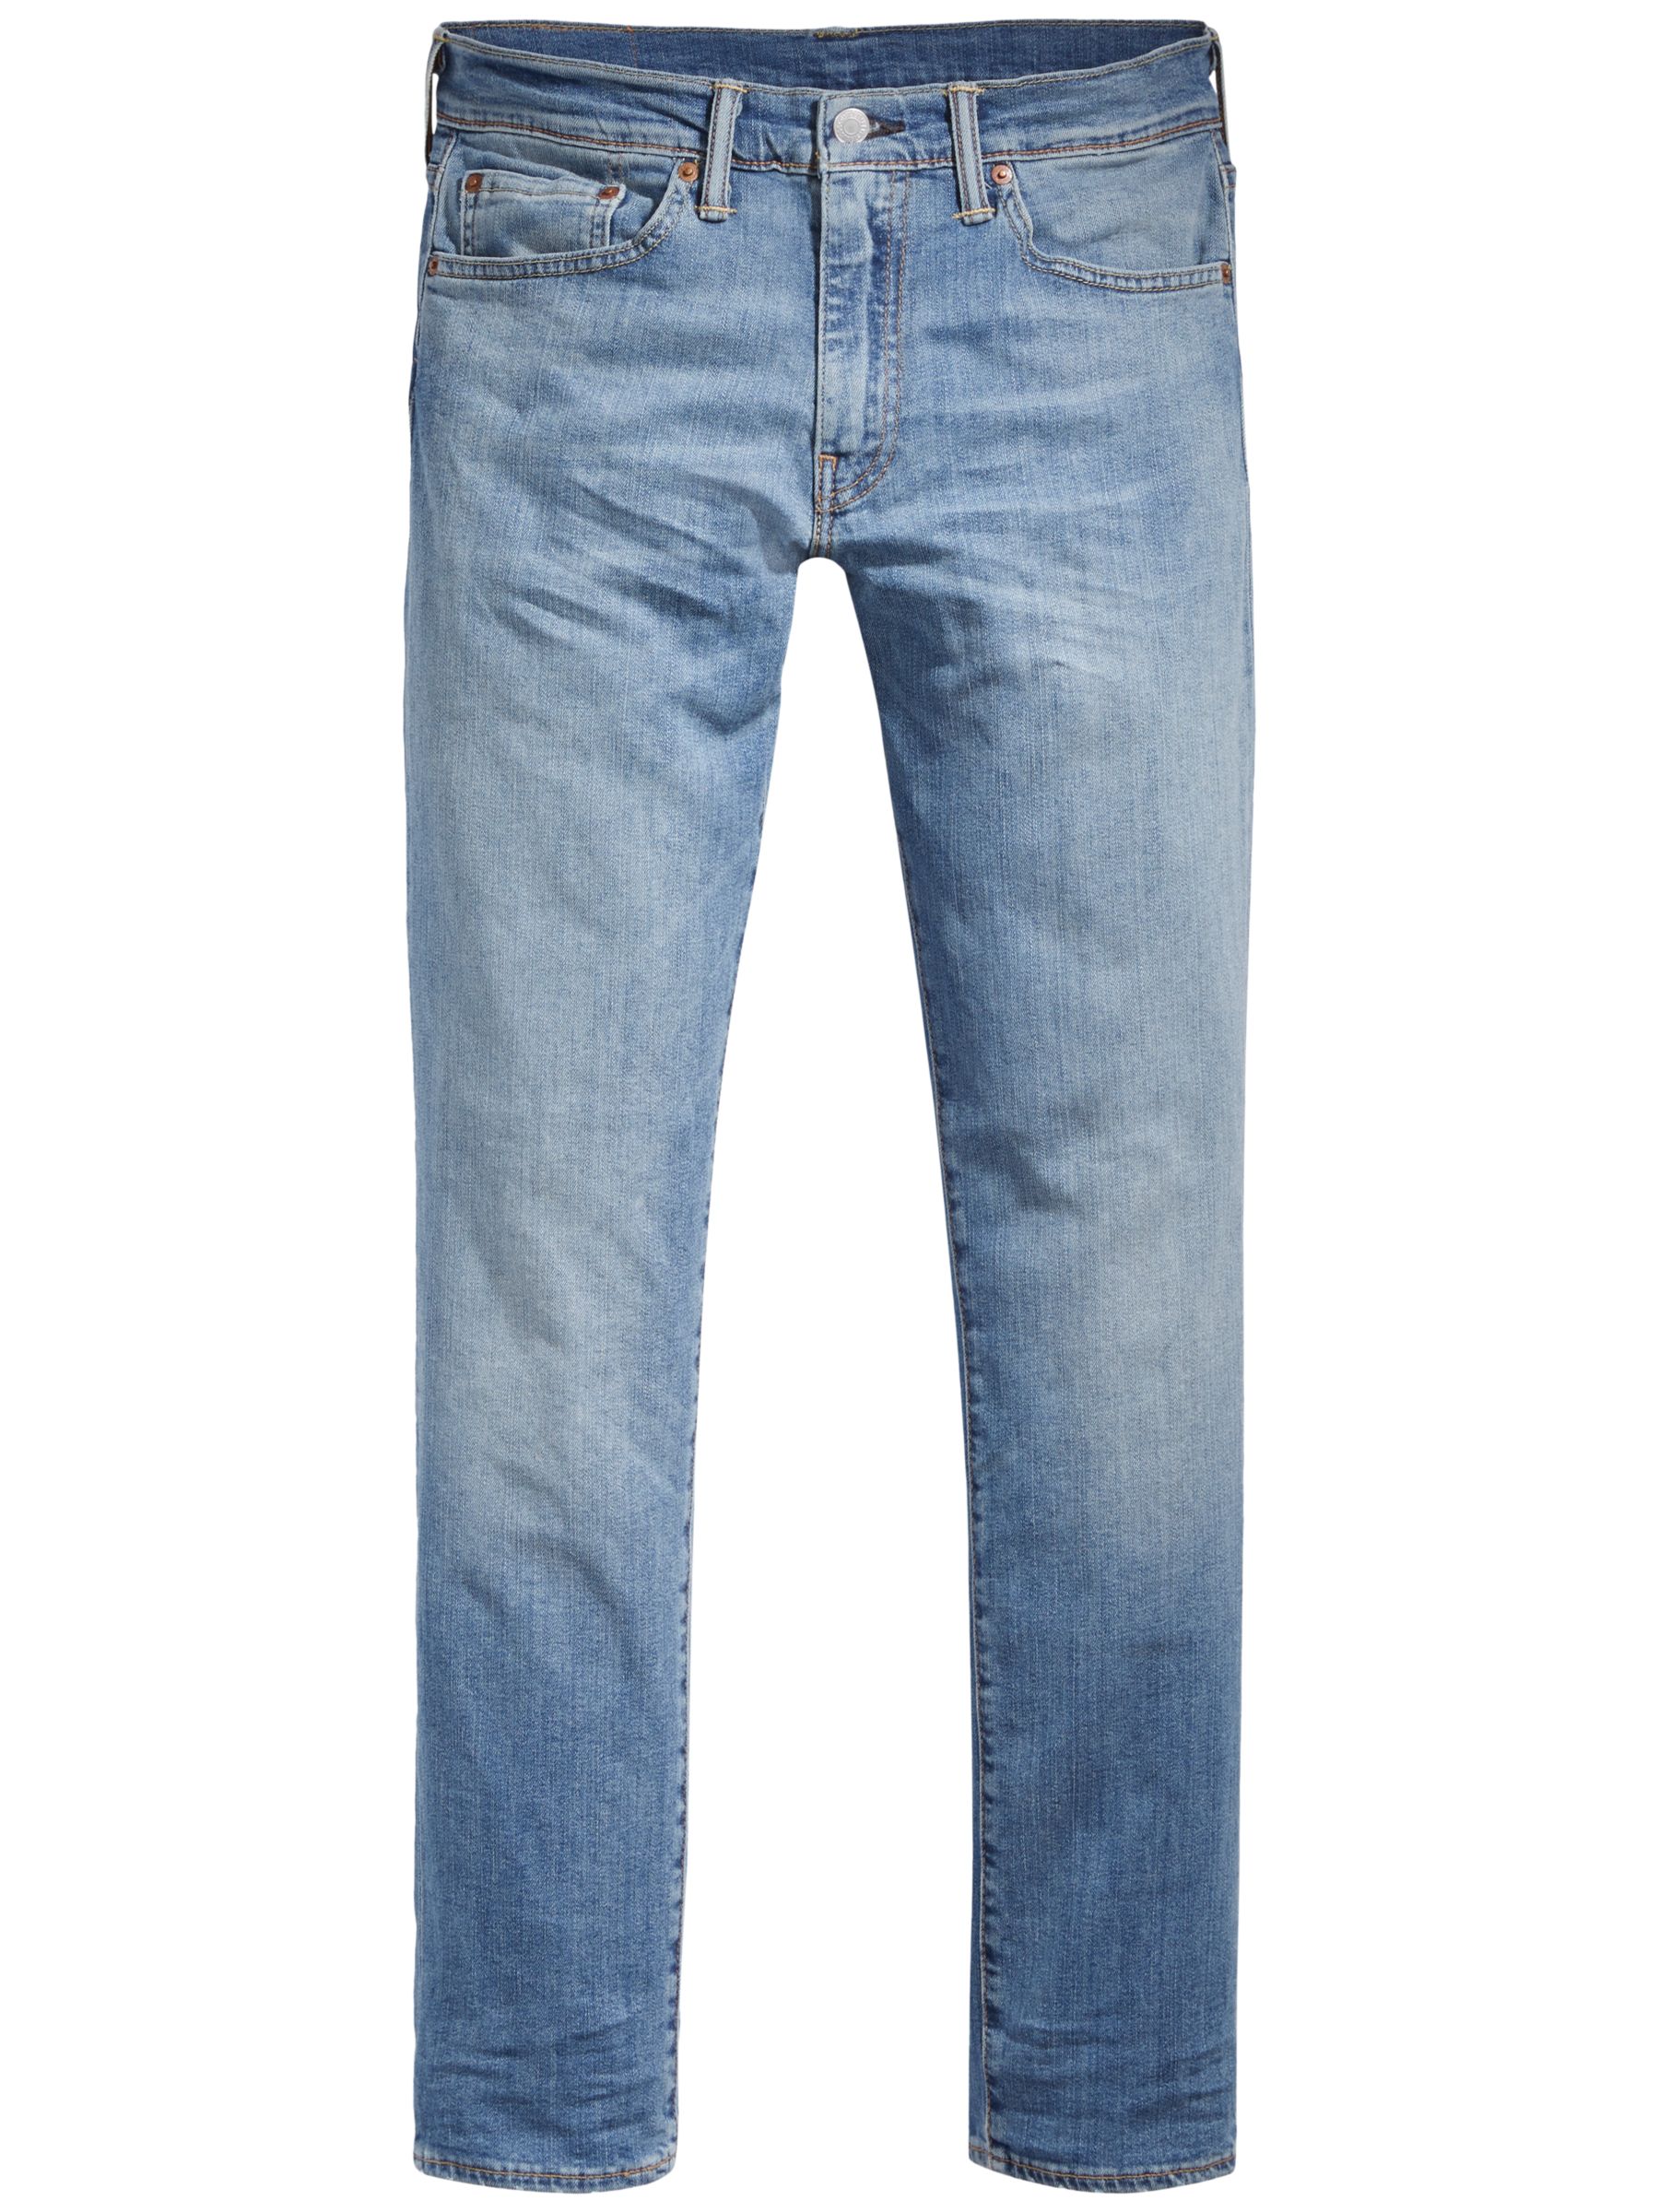 Levi's 511 Slim Fit Jeans, Sun Fade at 